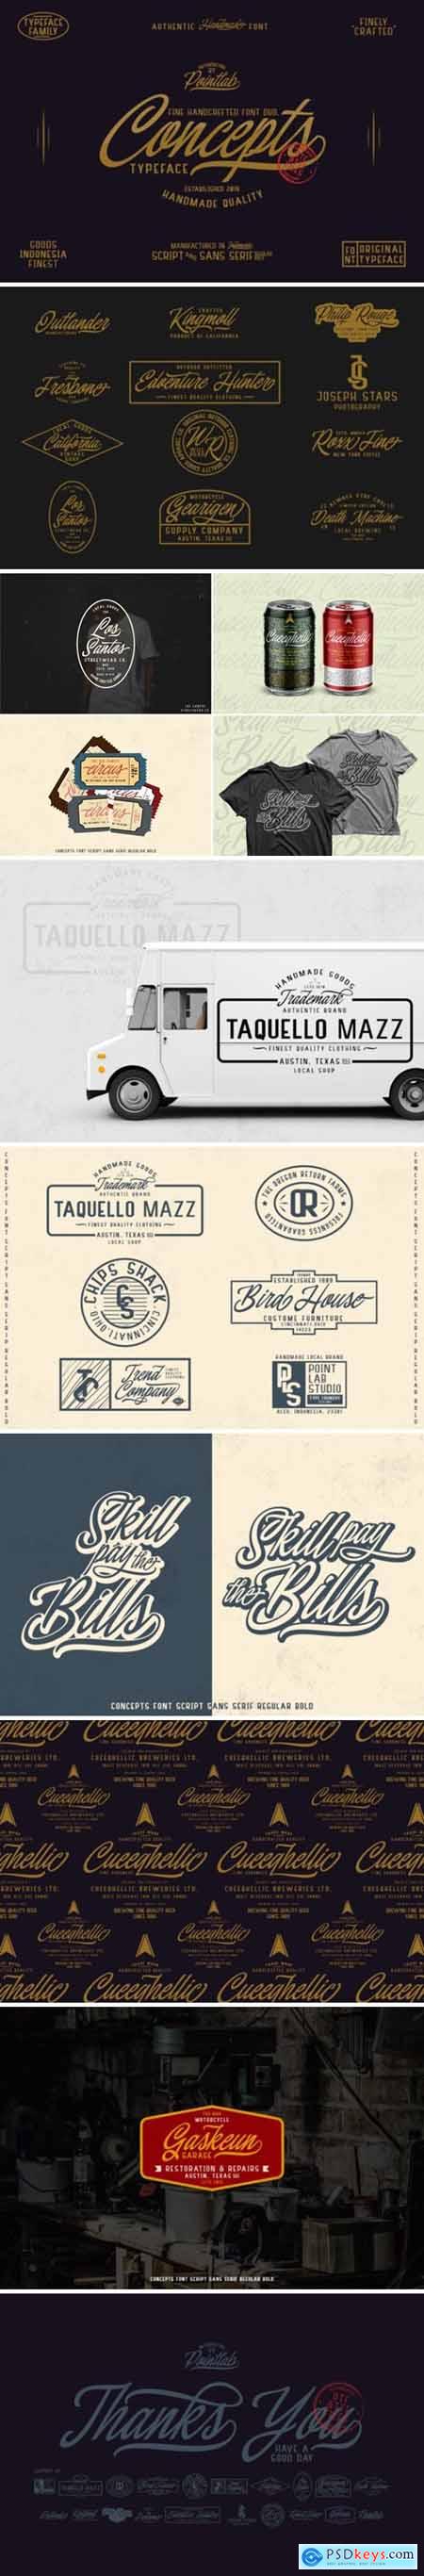 Concepts Font Family 307389